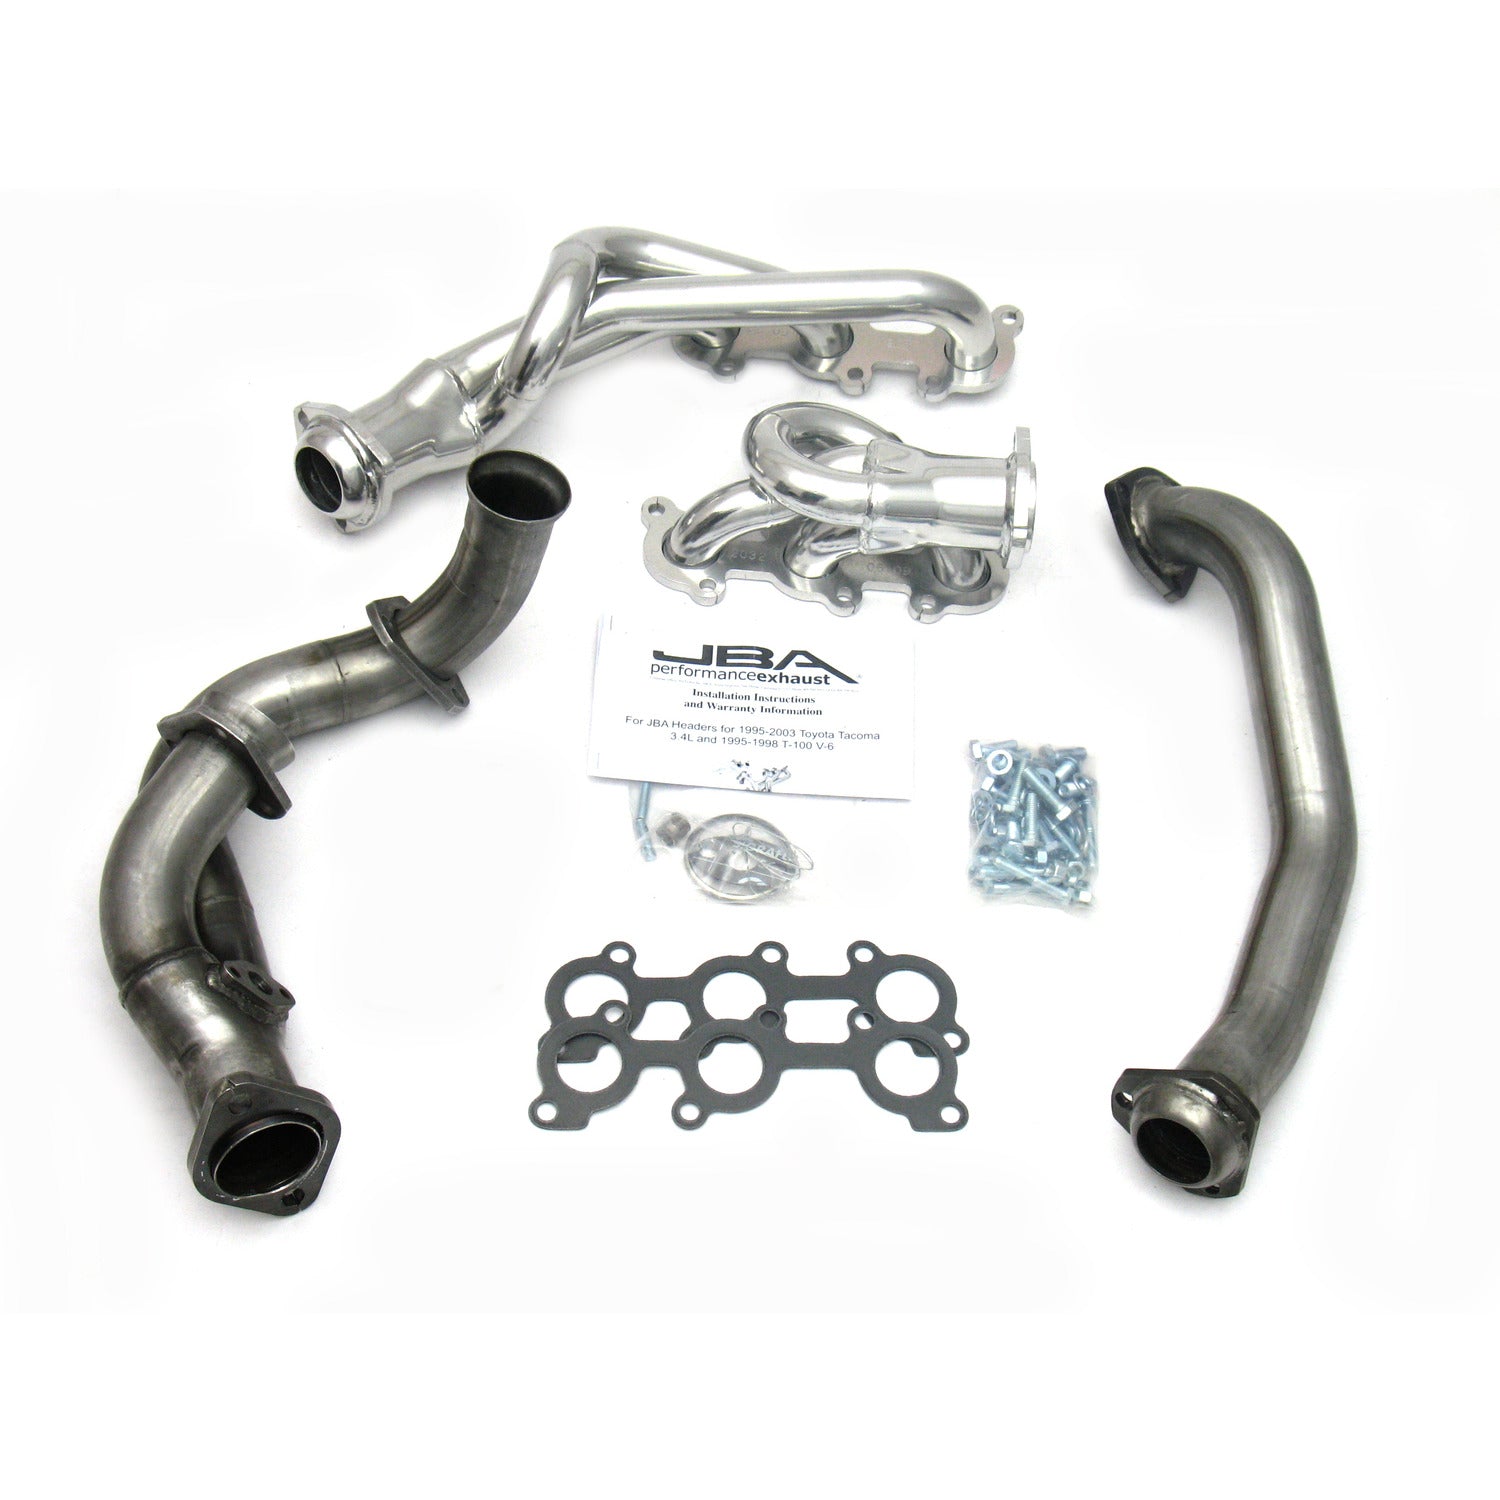 JBA Performance Exhaust 2032S-1JS 1 1/2" Header Shorty Stainless Steel 95-00 Tacoma 3.4L Silver Ceramic